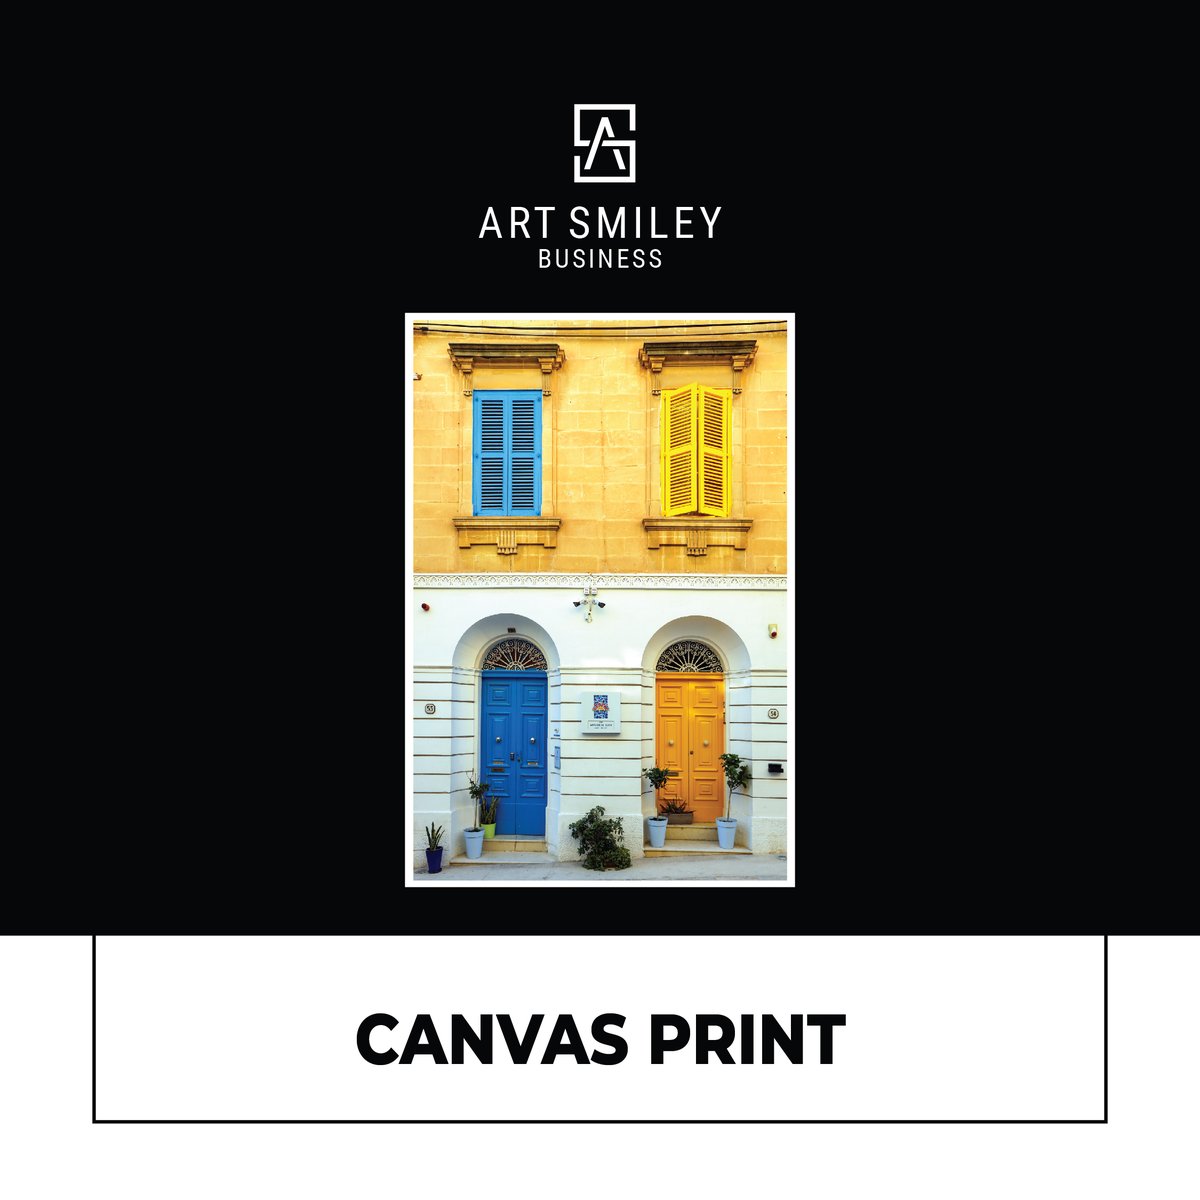 ArtSmiley's completed project canvas prints transformed walls into a beautiful gallery! 

Have you ordered your custom canvas prints yet?

#artsondemand #canvasprints #canvasprinting #customcanvas #canvaspainting